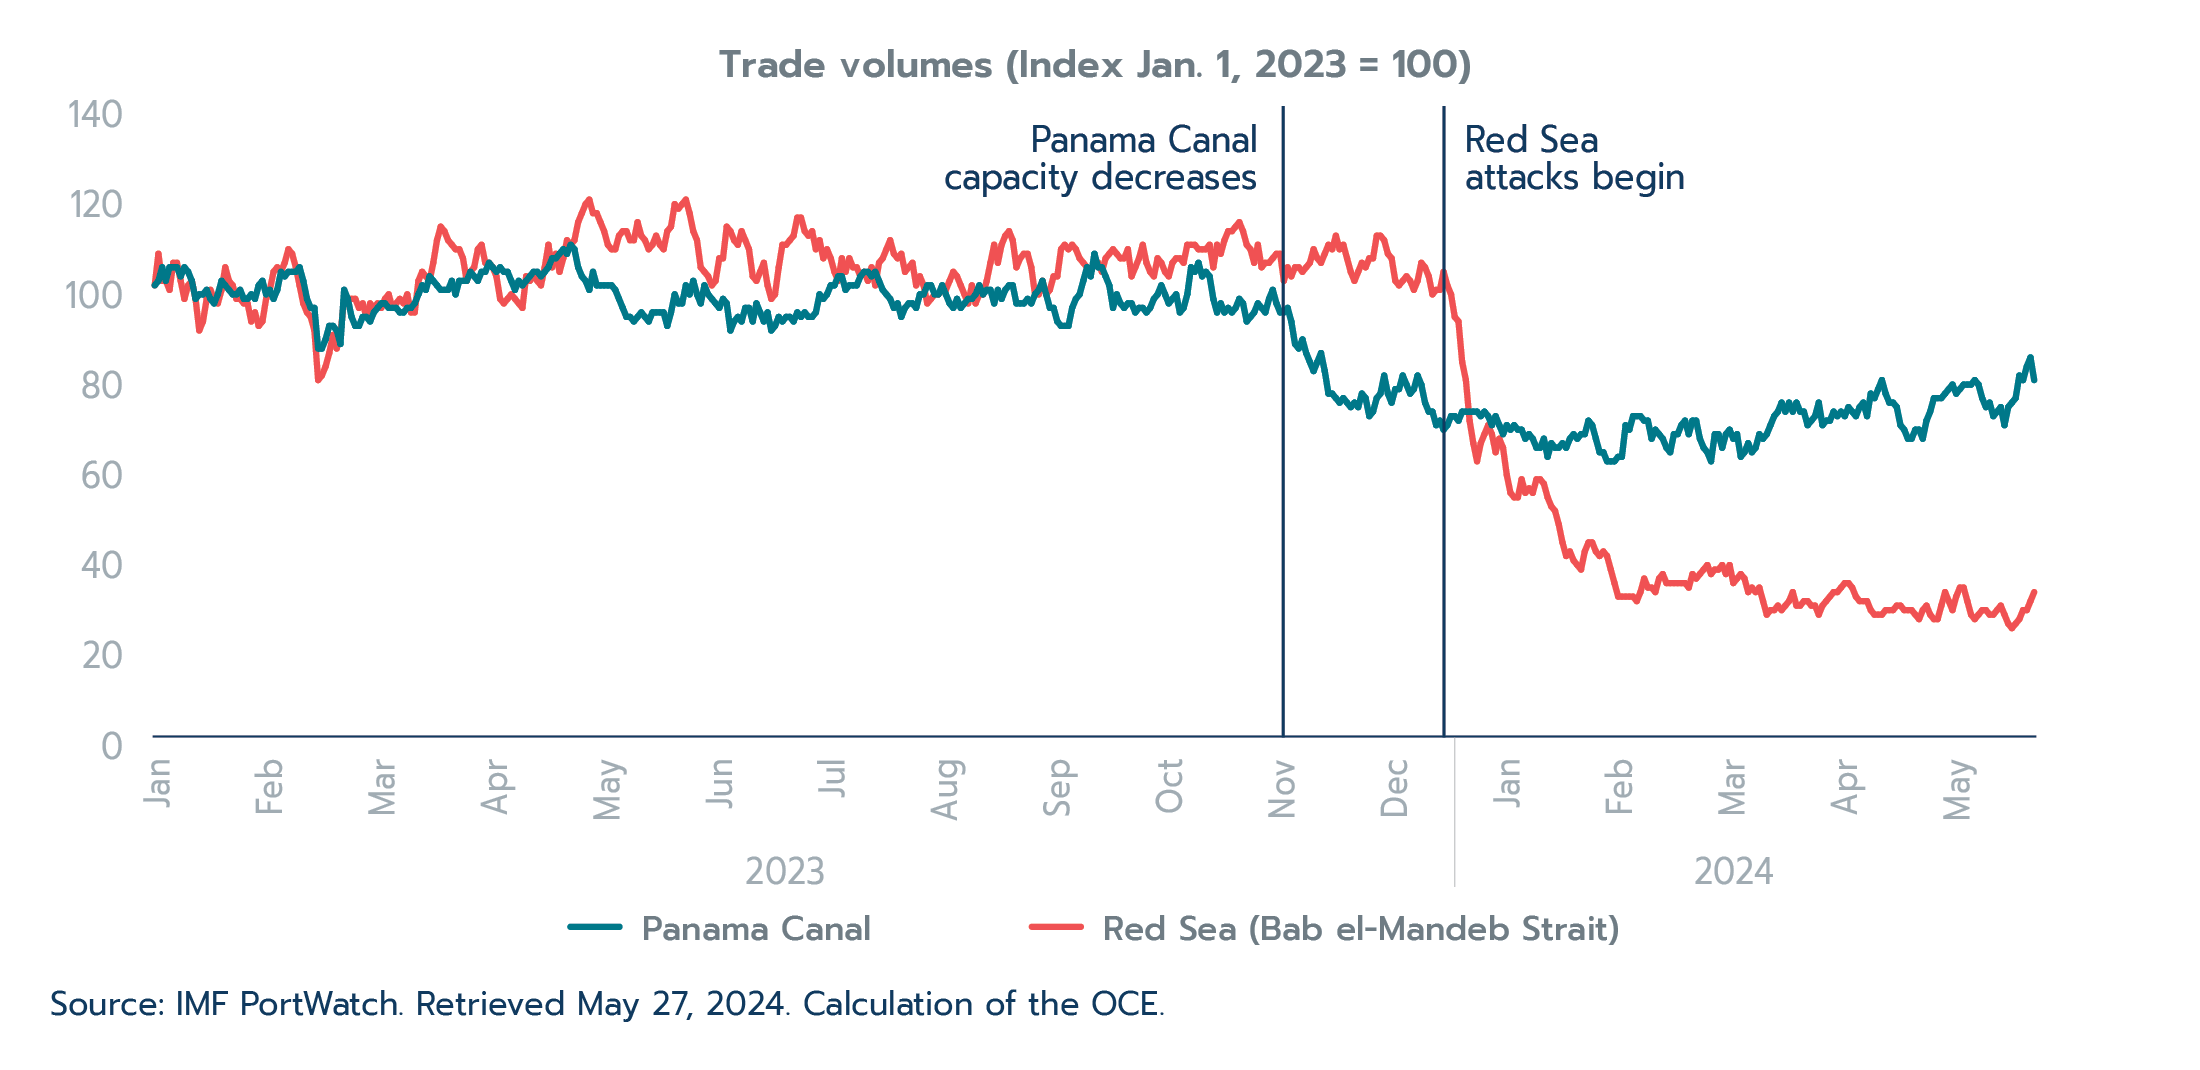 Figure 1.3: Trade volumes decline in Red Sea and Panama Canal